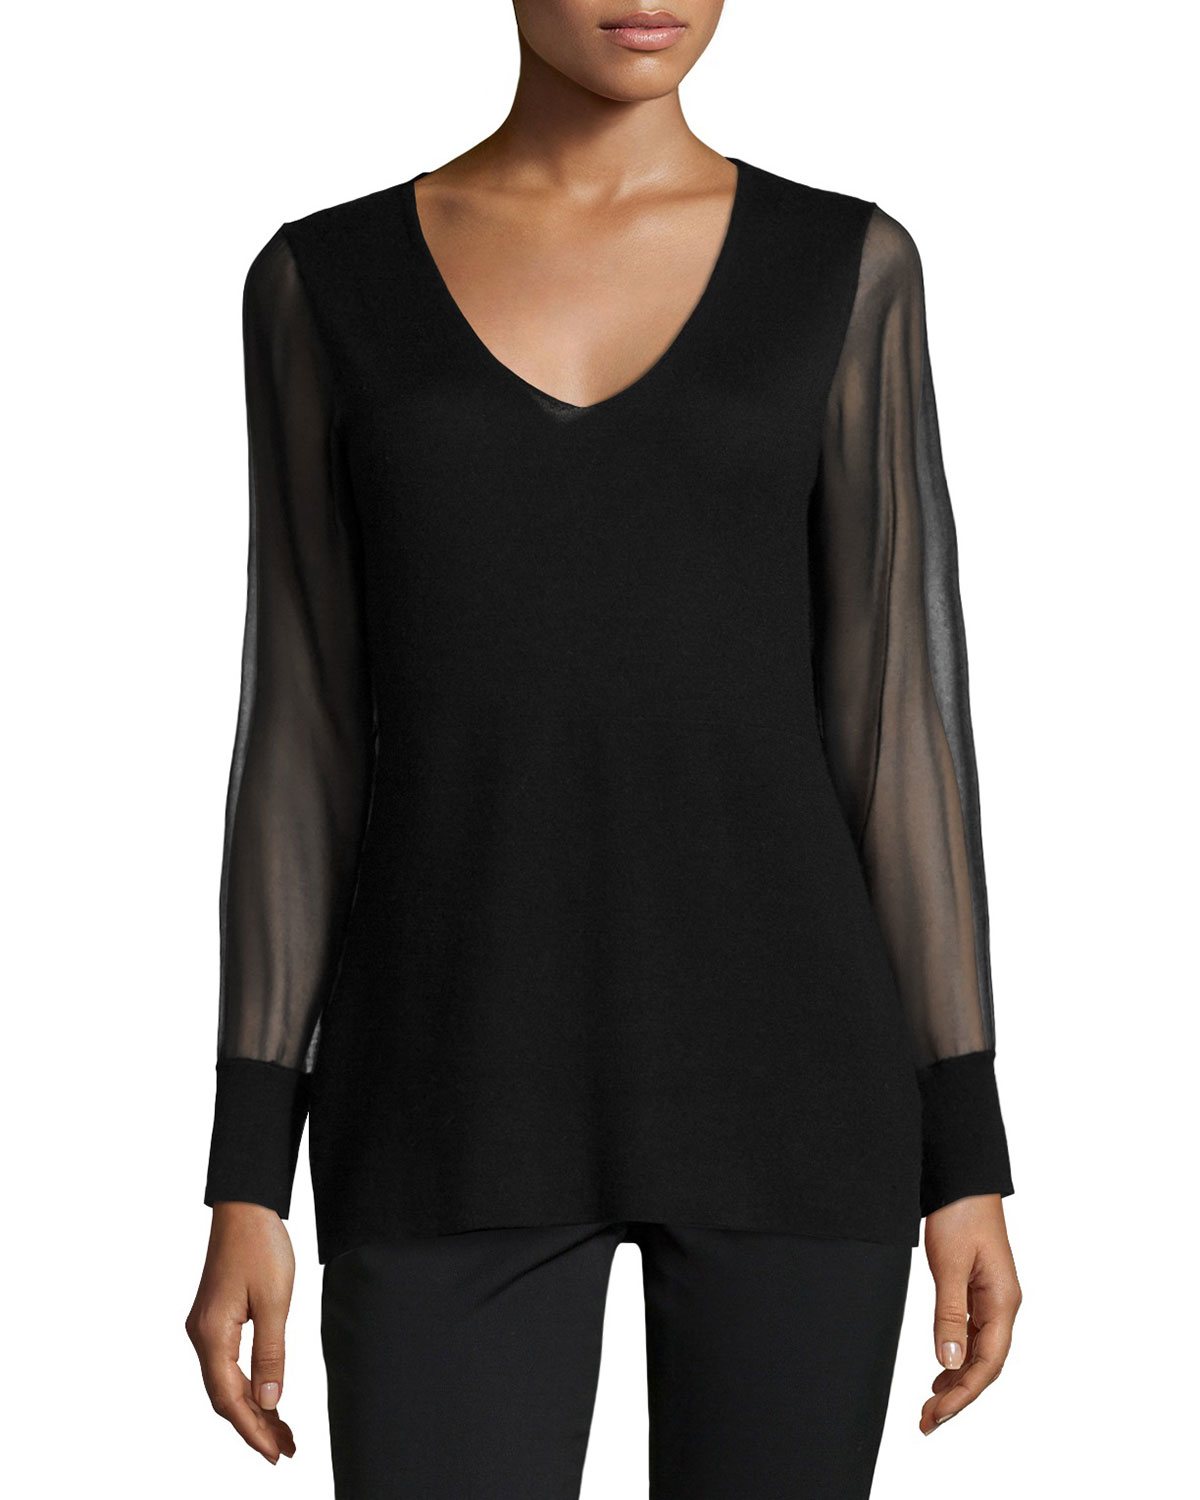 Neiman marcus Cashmere Sheer-sleeve V-neck Top in Black | Lyst